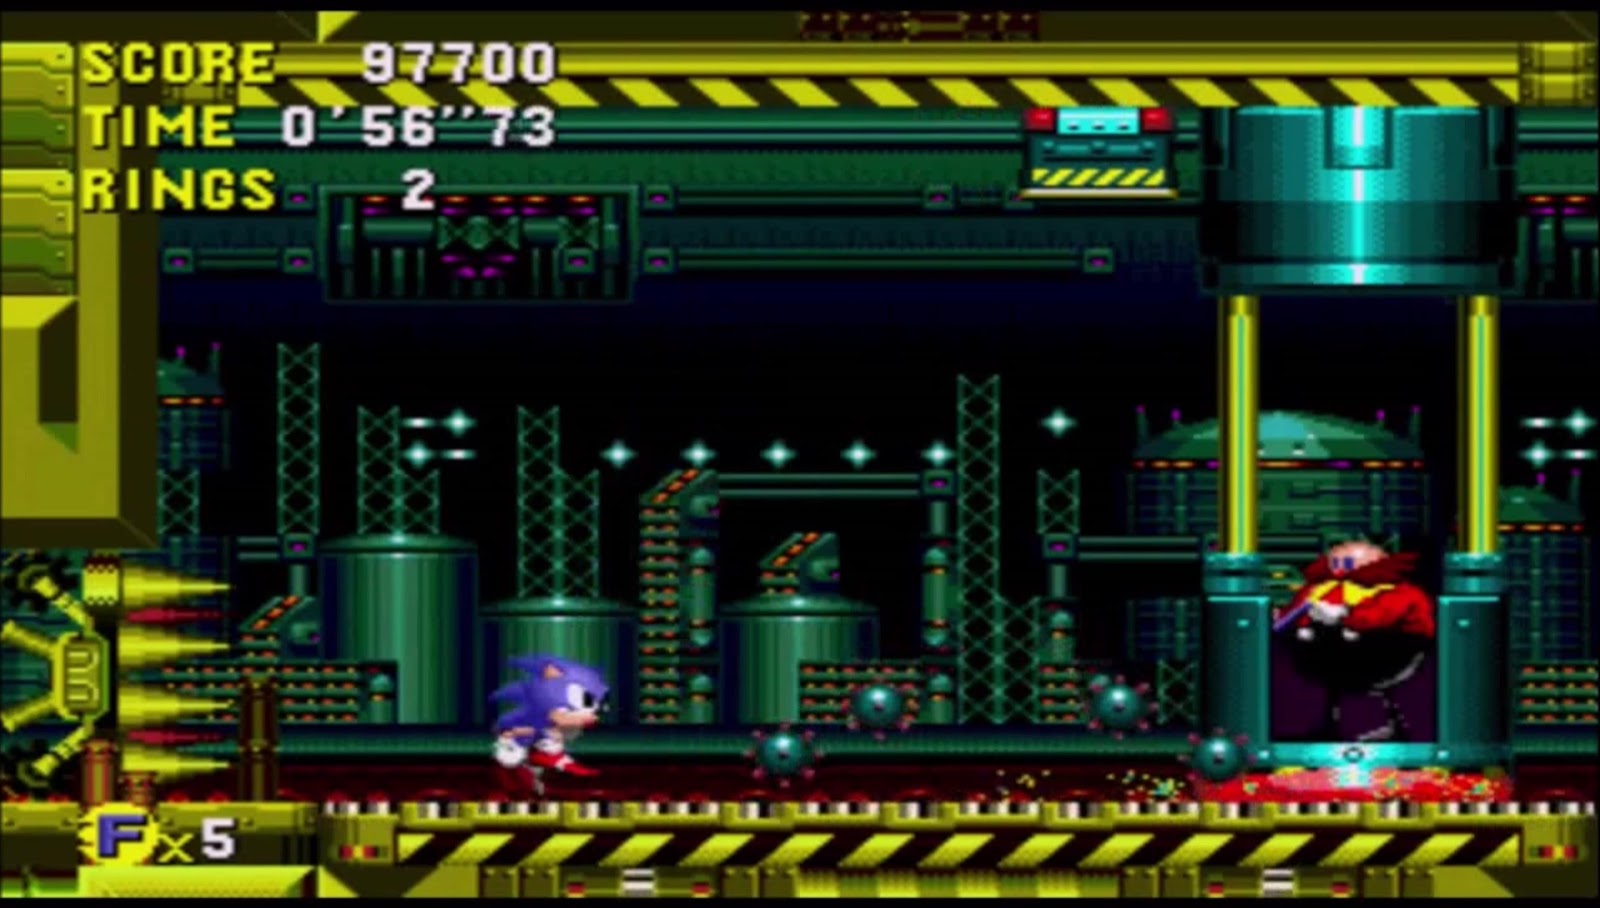 Pinpointing The Most Difficult Sonic Game 